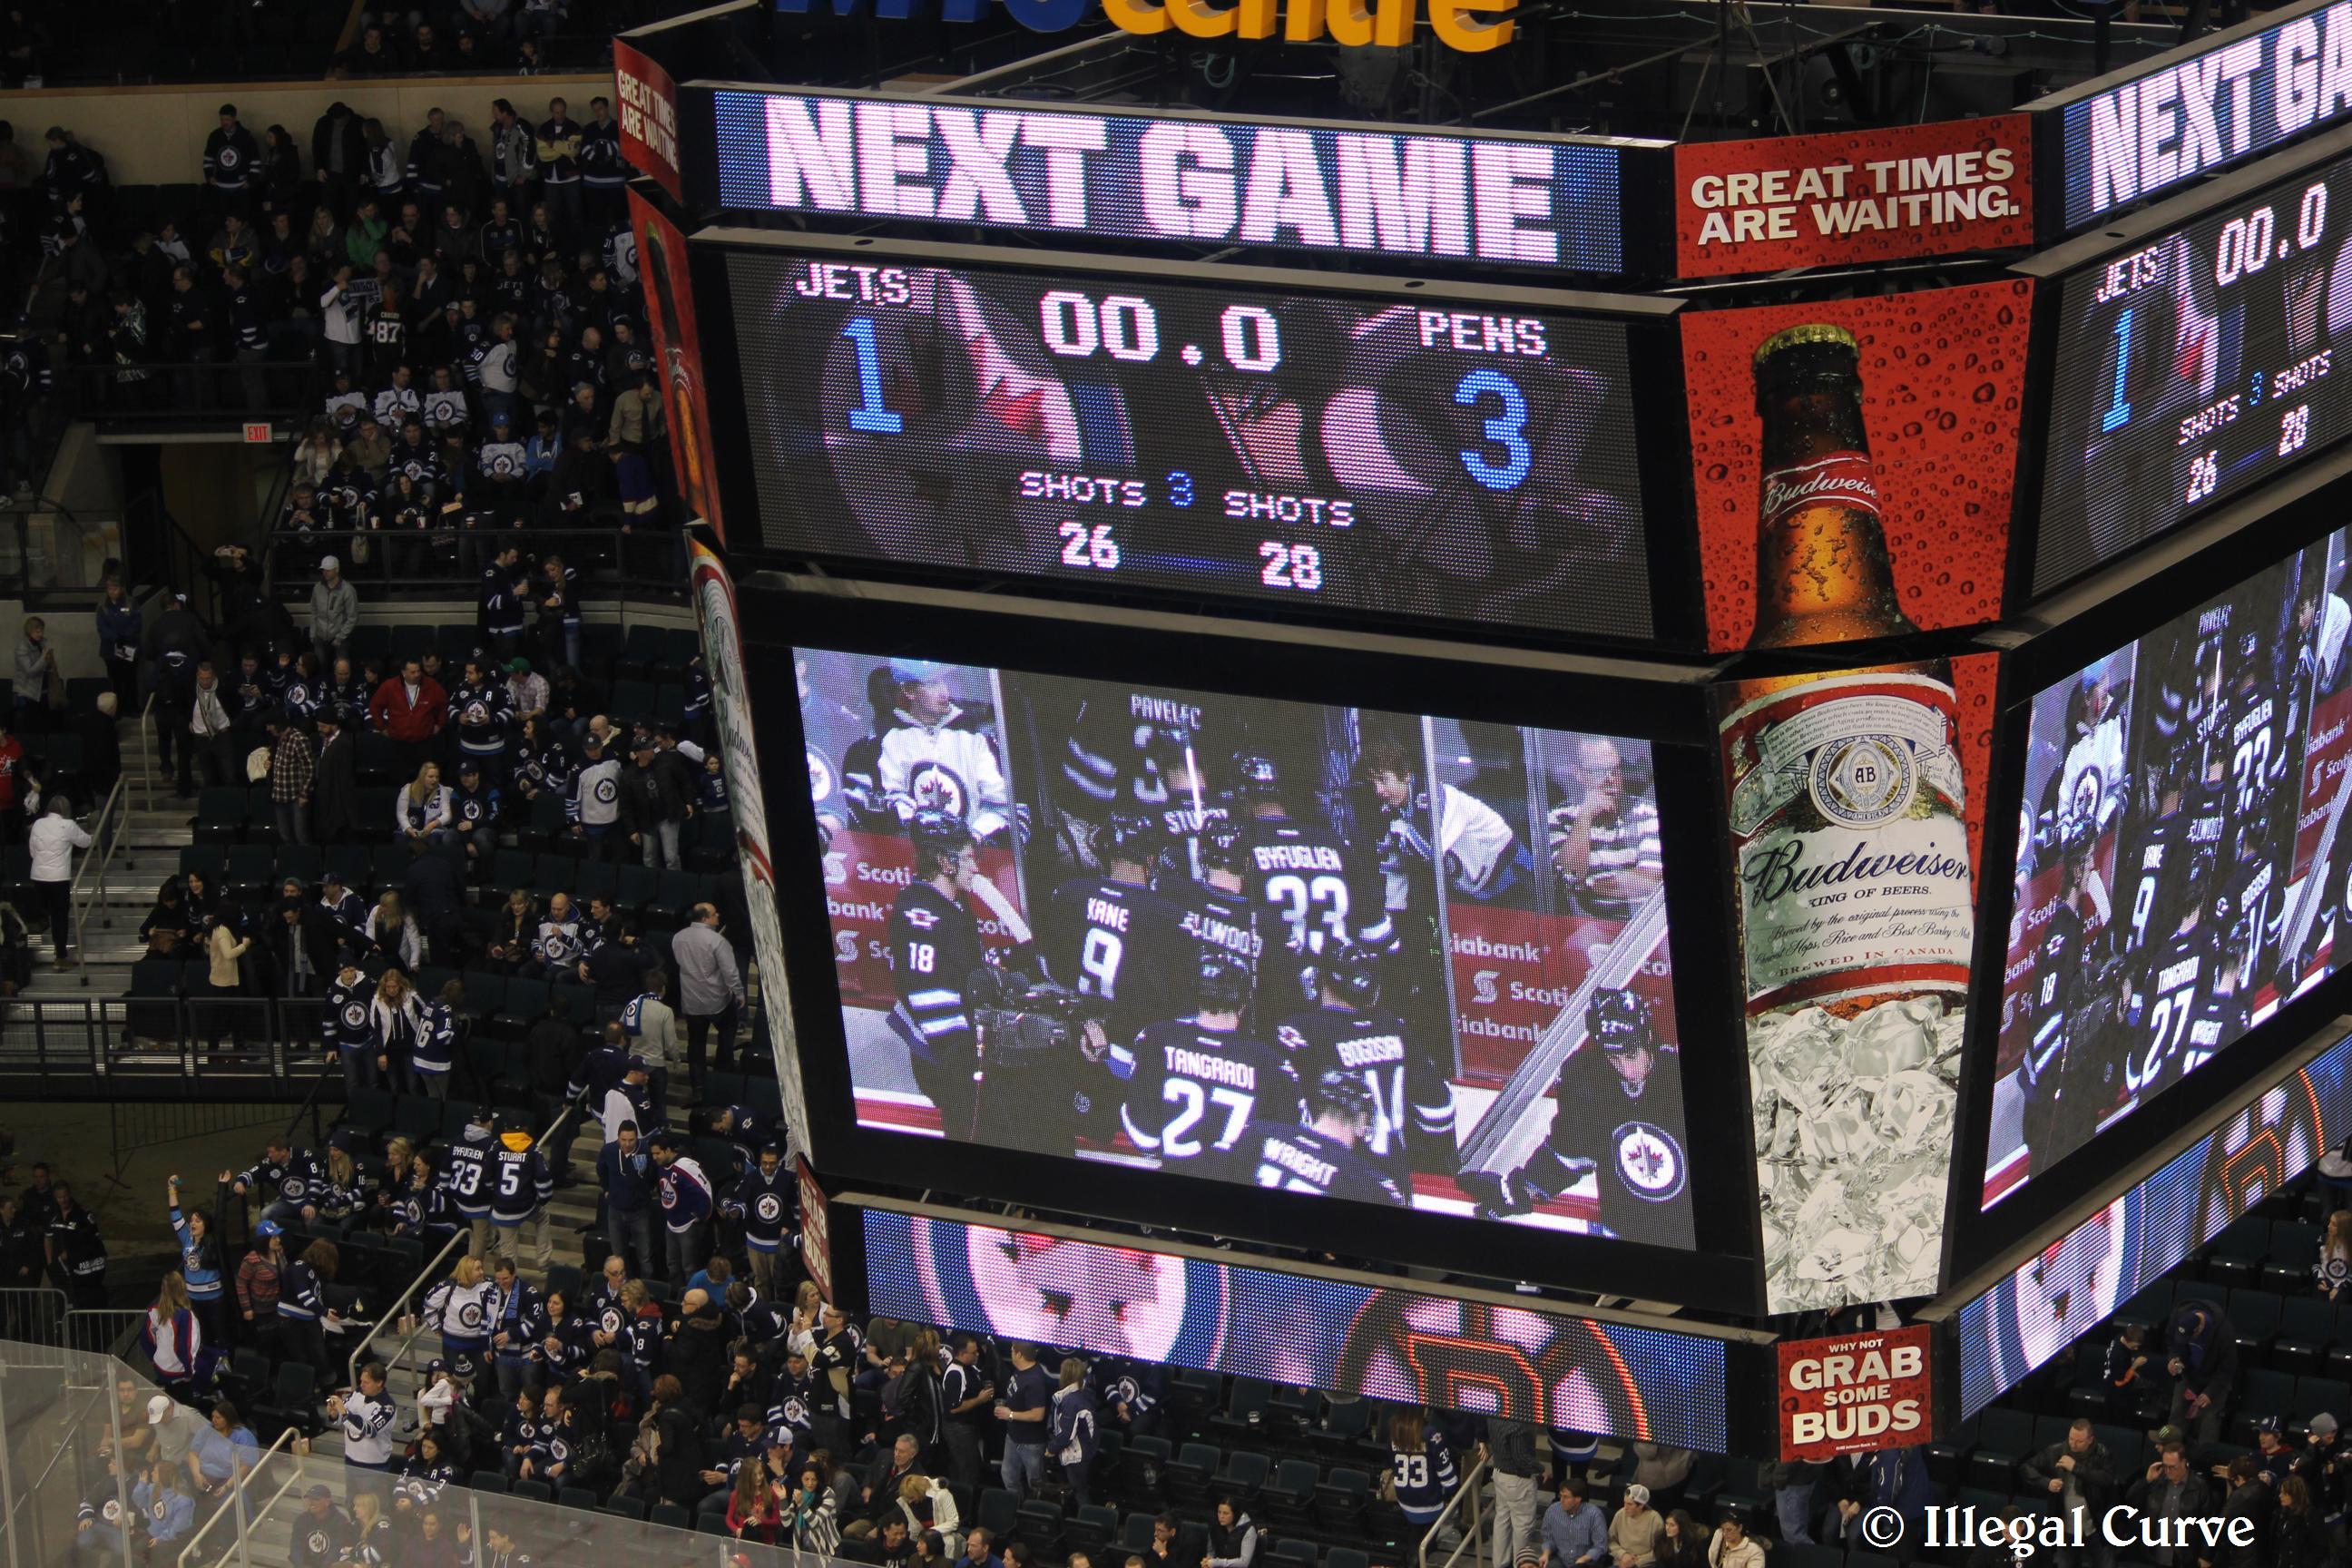 Jets lose to Pens 3 1